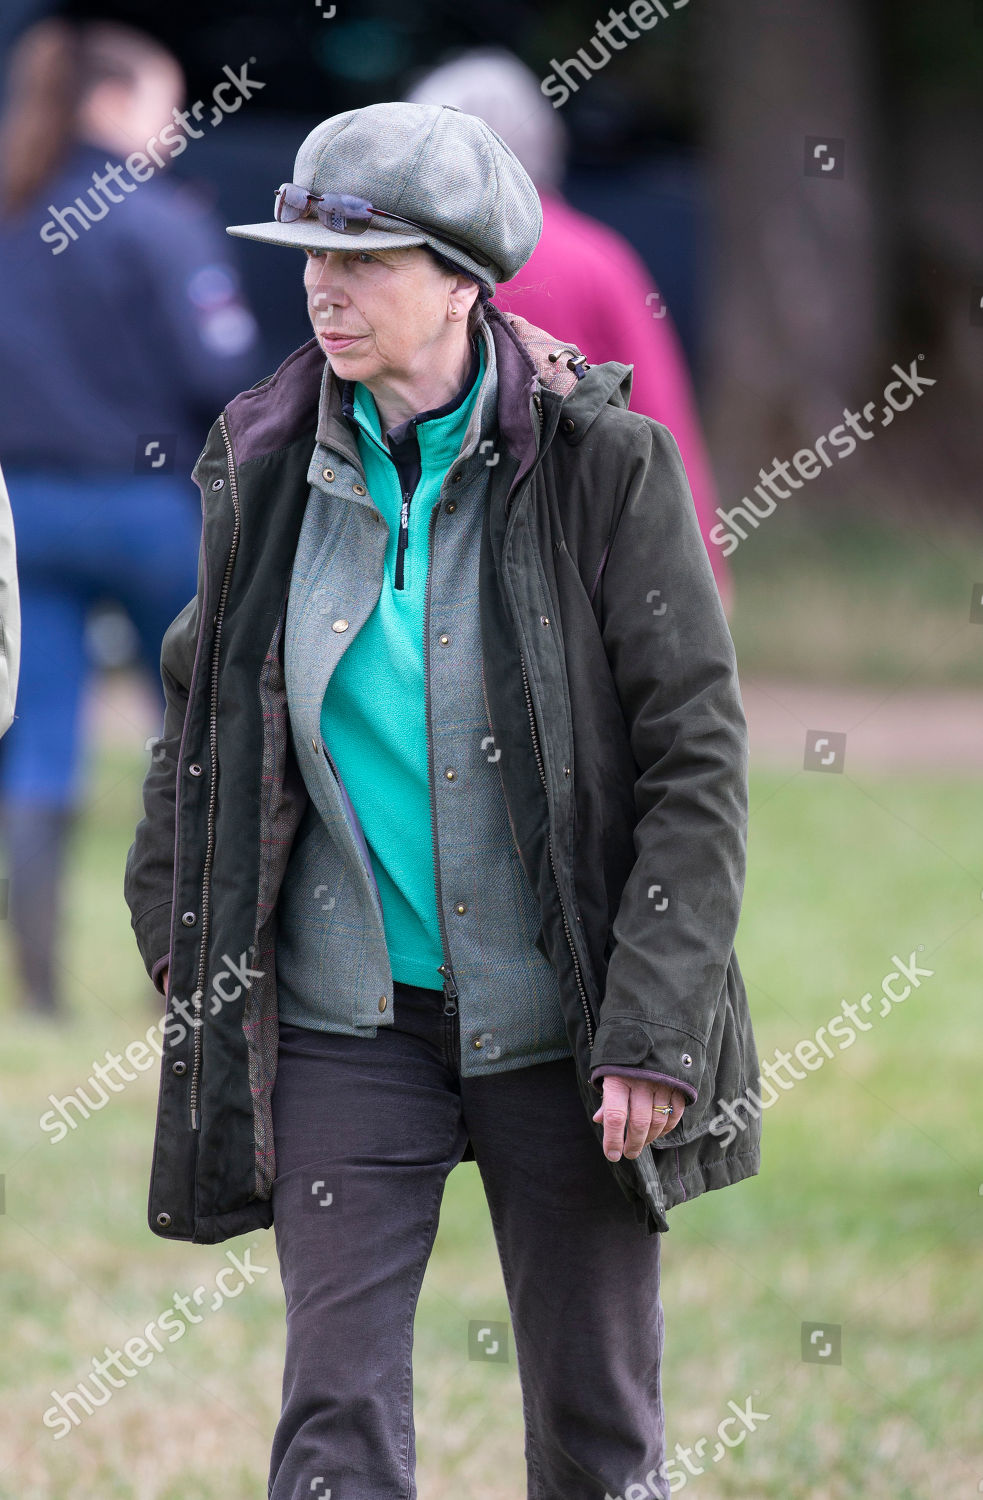 whately-manor-international-horse-trials-at-gatcombe-park-gloucestershire-uk-shutterstock-editorial-9877099r.jpg